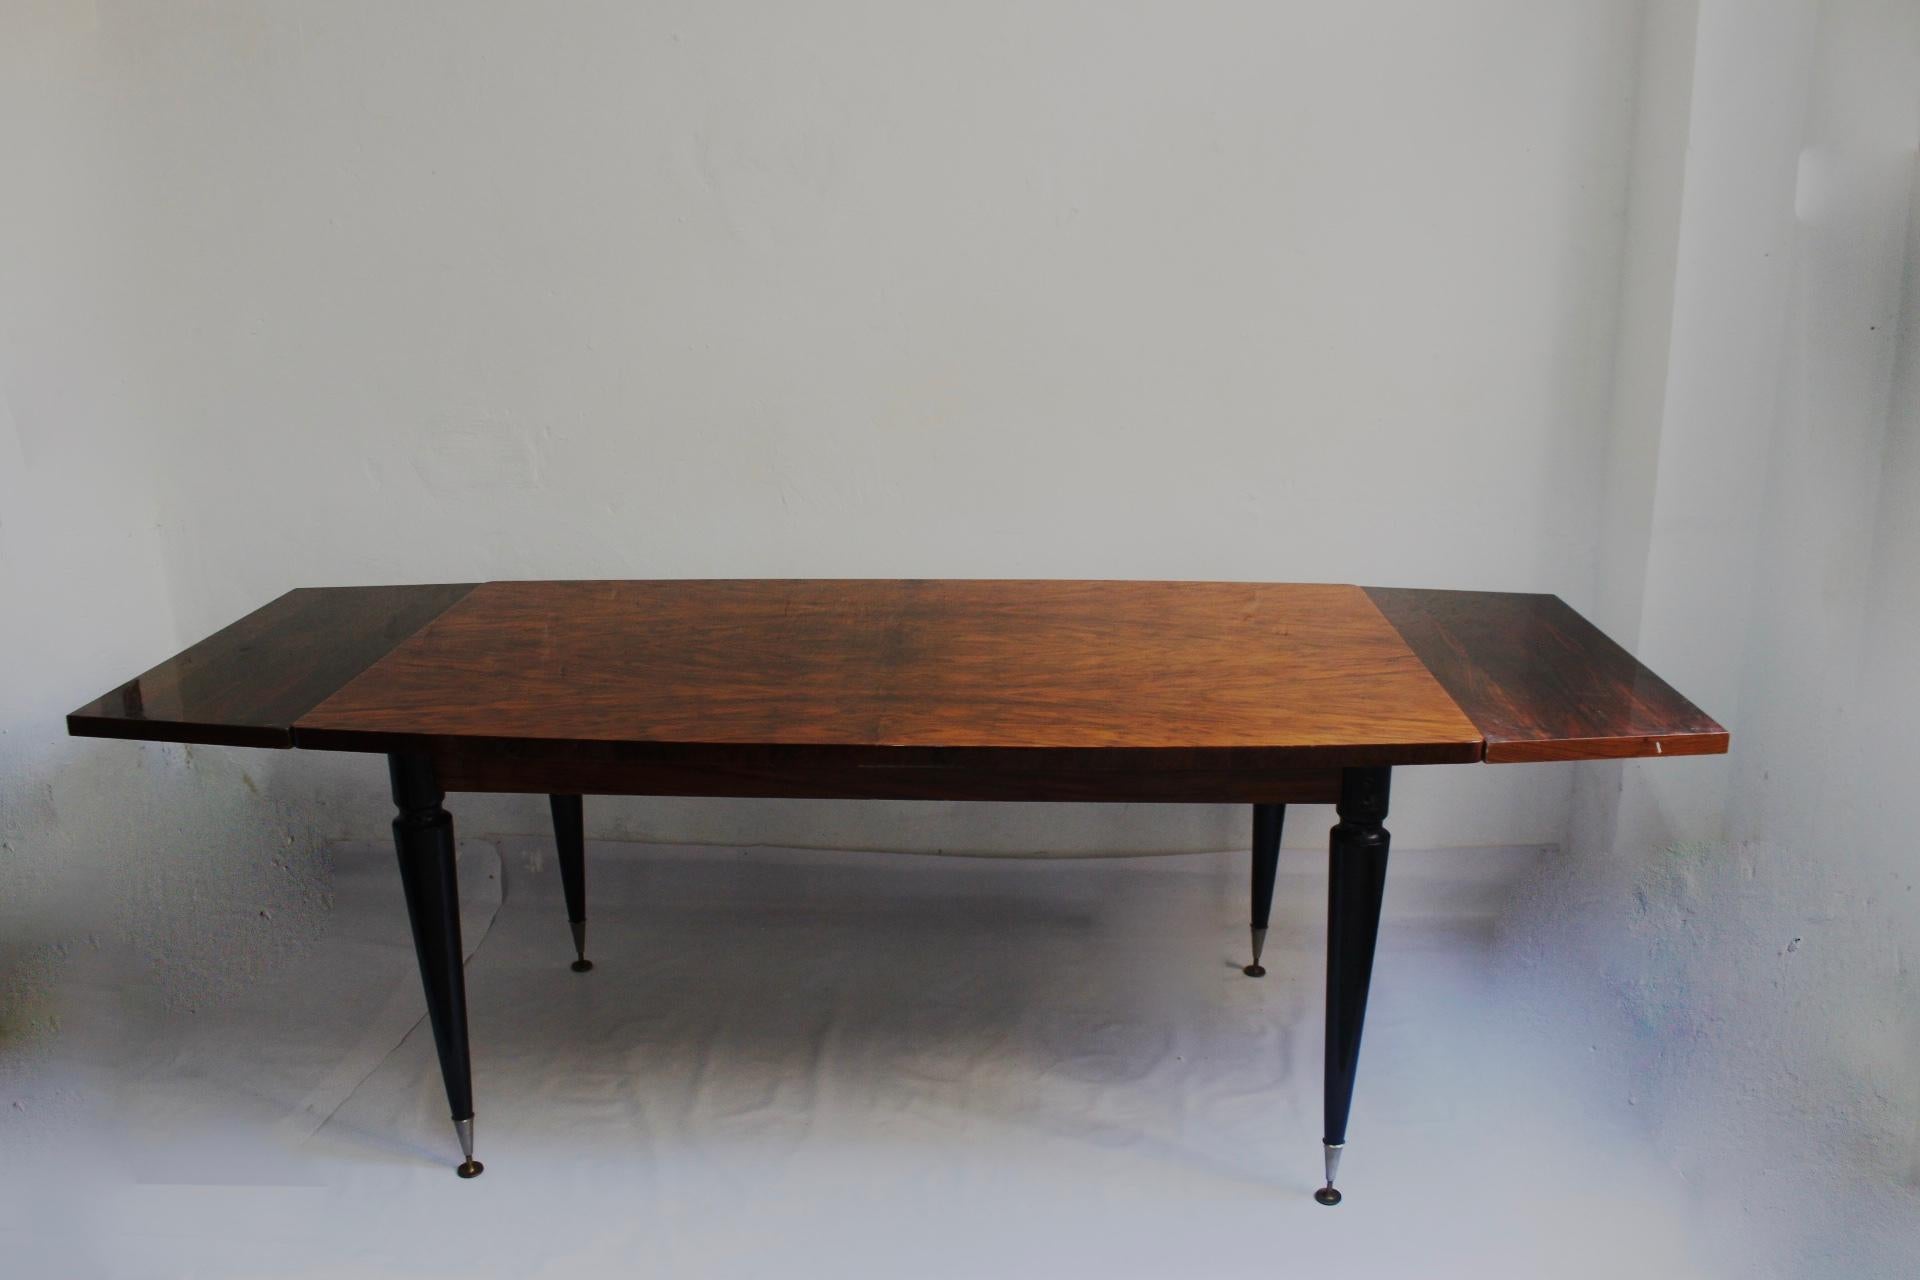 French Art Deco High Quality American Walnut Burl Extensible Dining Table, 1940s For Sale 4